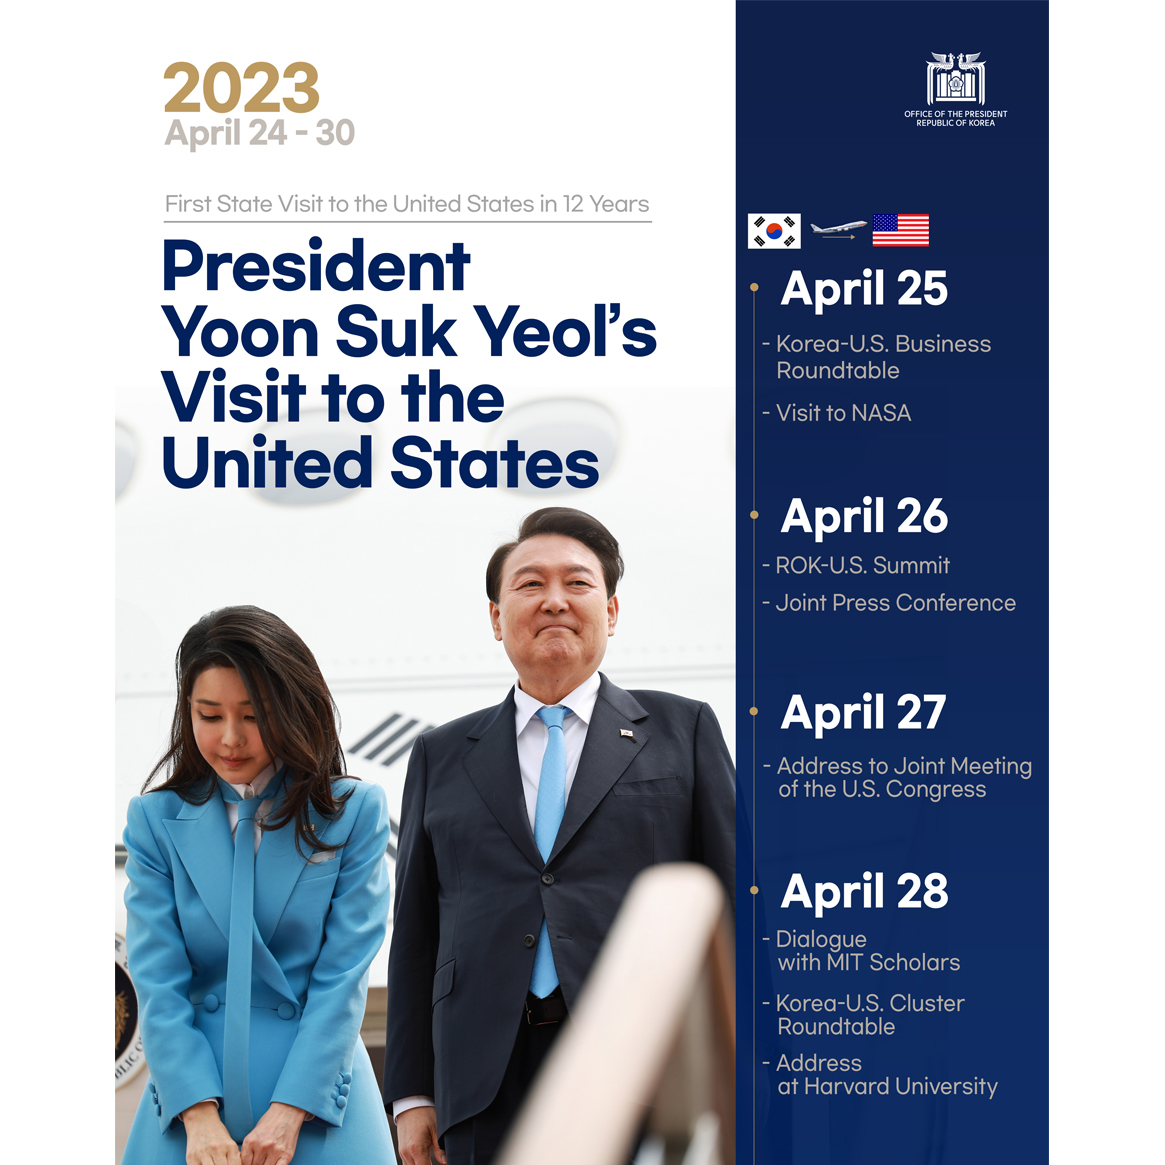 President Yoon Suk Yeol's Visit to the United States